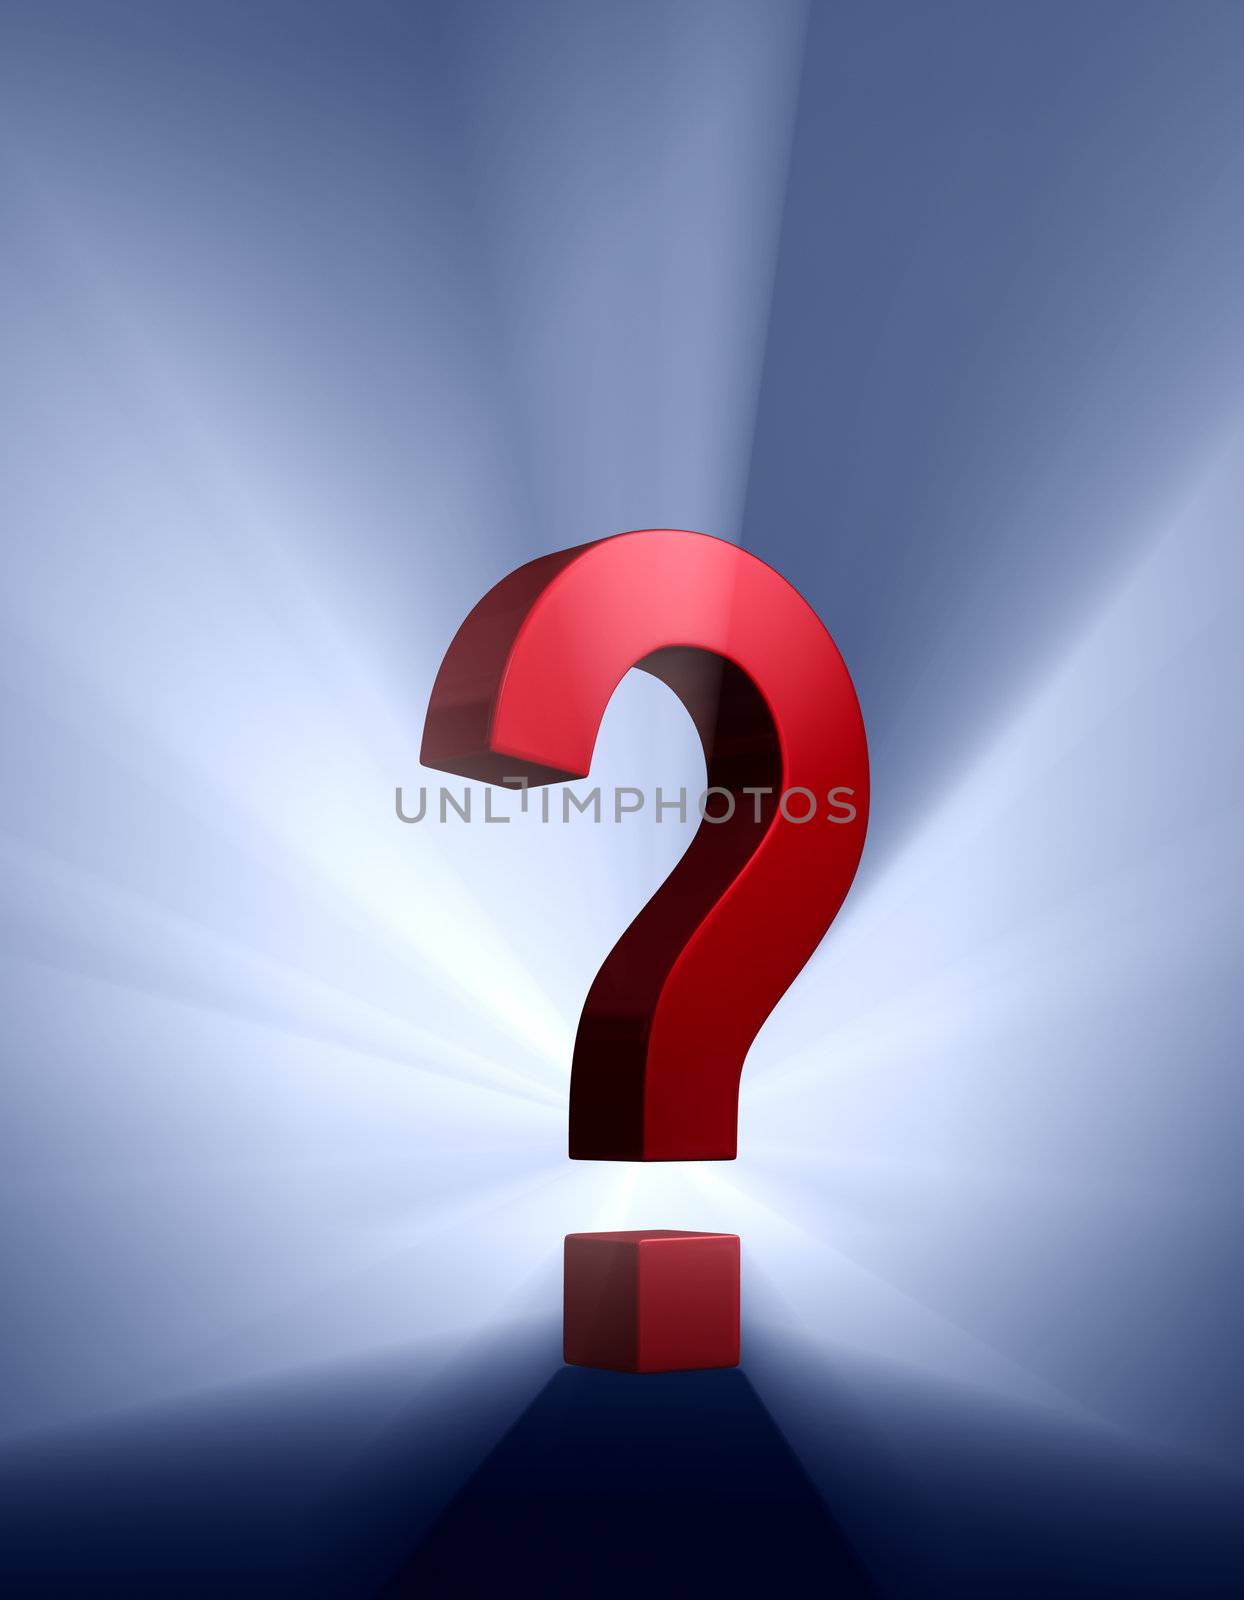 A red question mark on a dark blue background brilliantly backlight with light rays shining through.